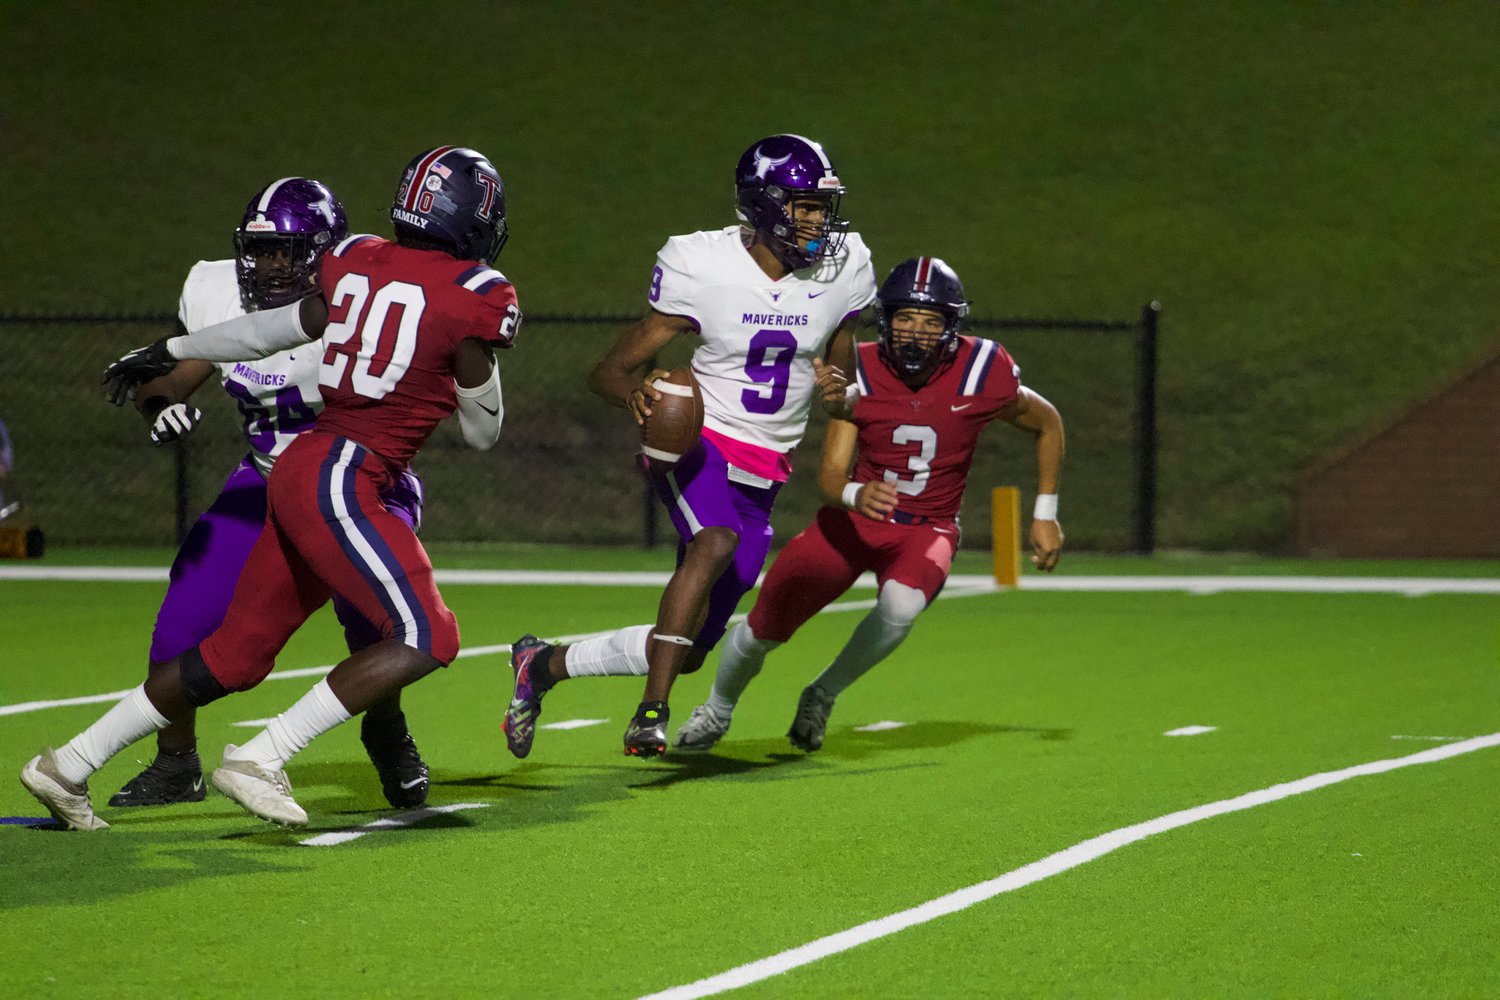 Josh Johnson tries to step up in the pocket during Thursday's game between Tompkins and Morton Ranch at Rhodes Stadium.